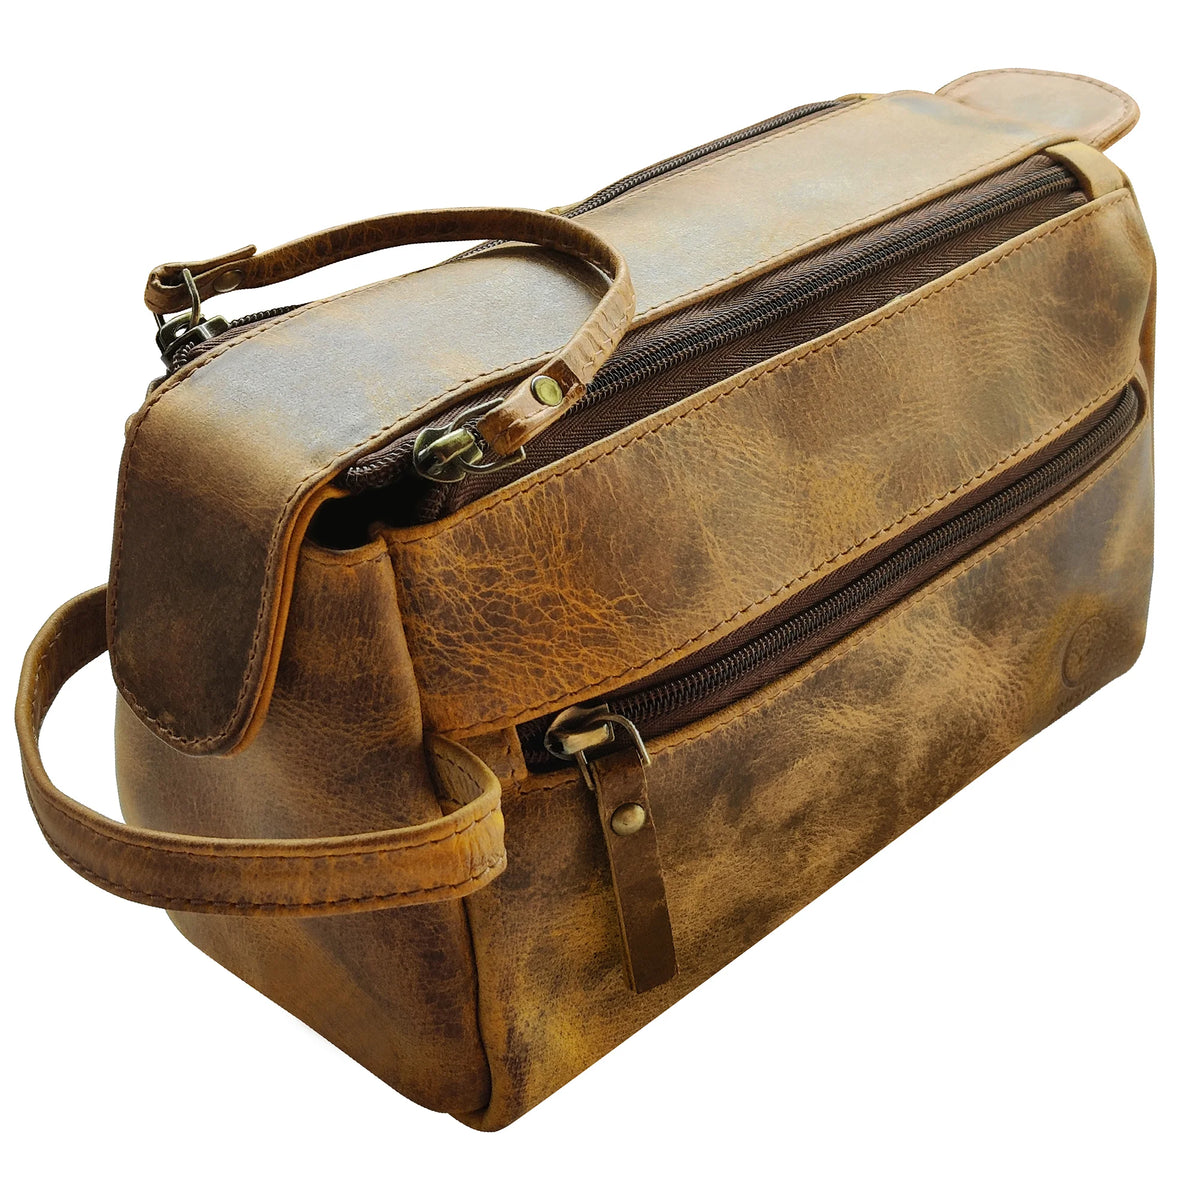 Leather Toiletry Bag Dopp Kit – Rustic Town